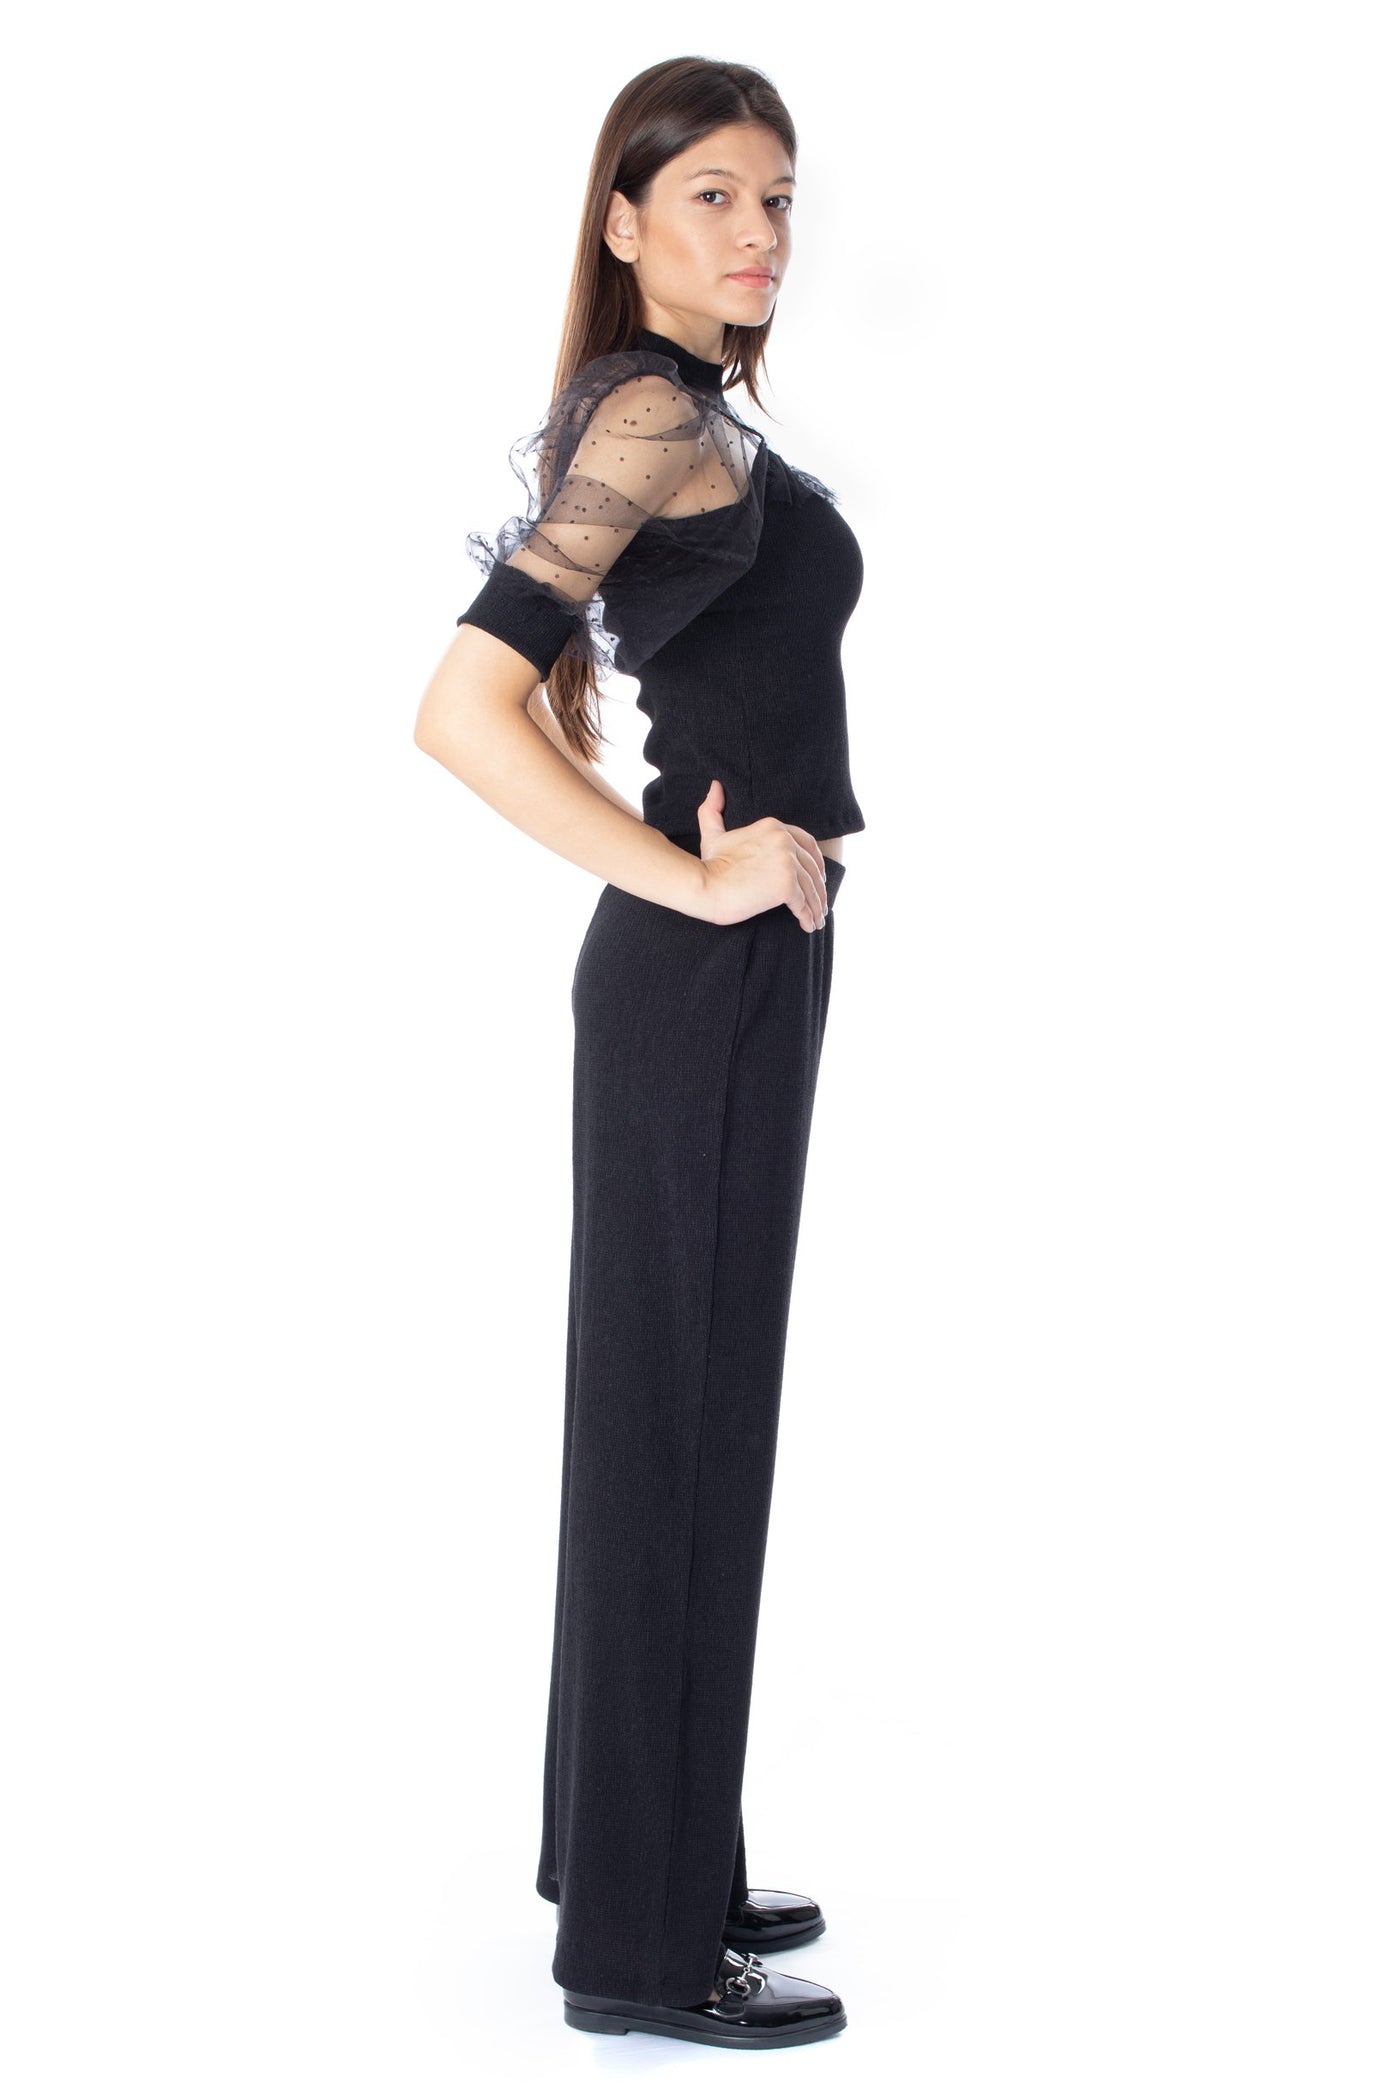 chassca straight pant in black - Breakmood